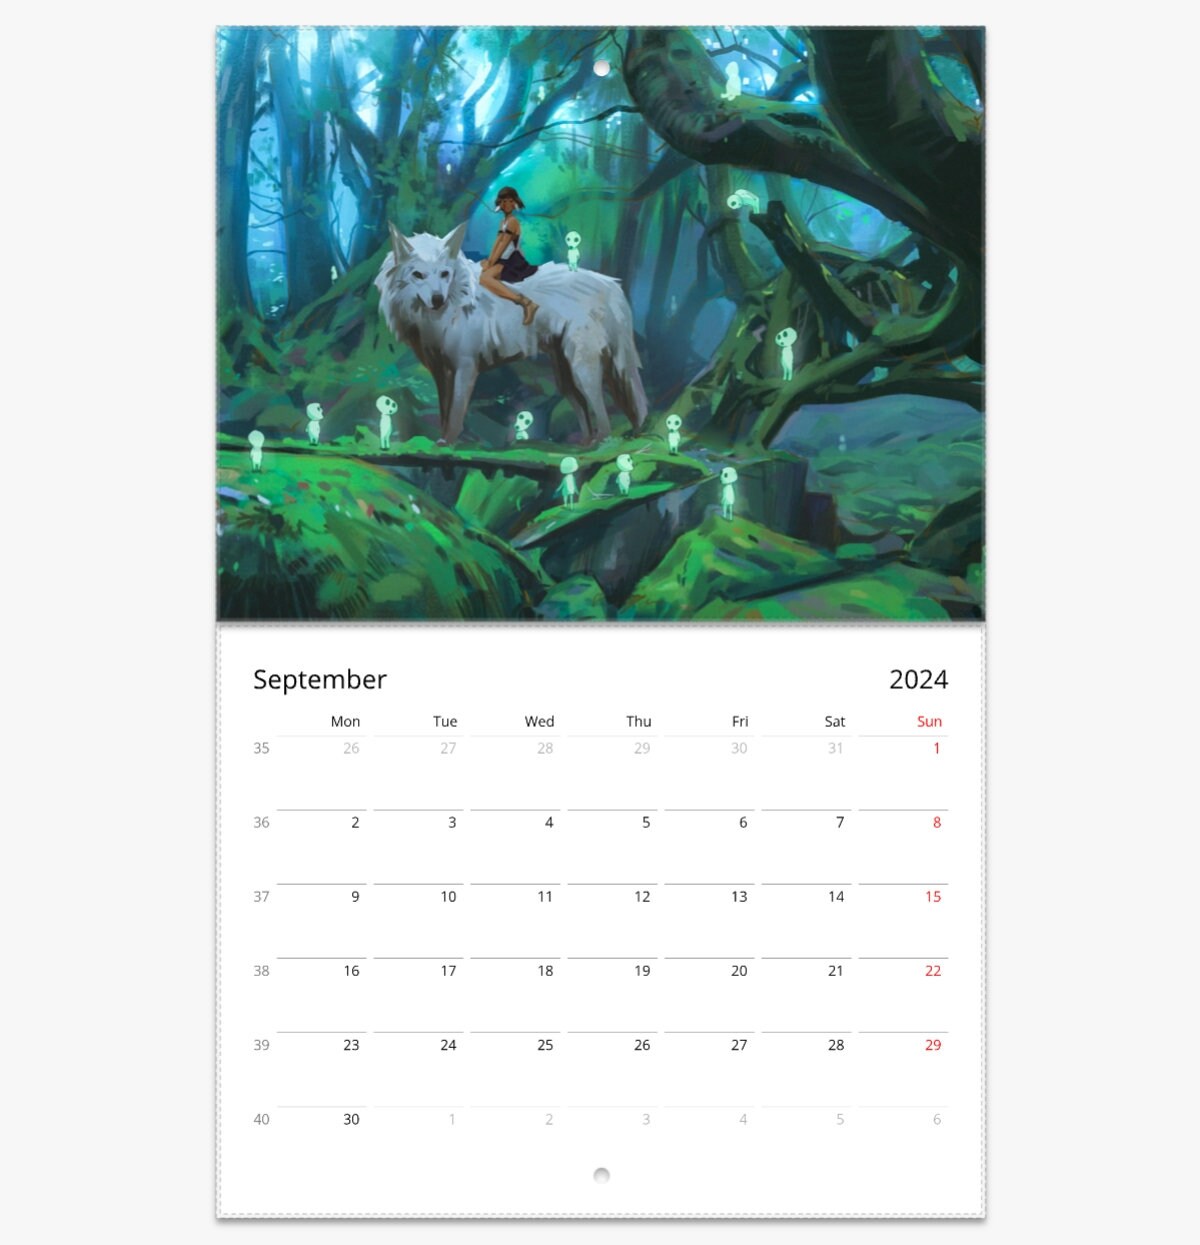 You can now get a Ghibli jigsaw puzzle calendar for 2024